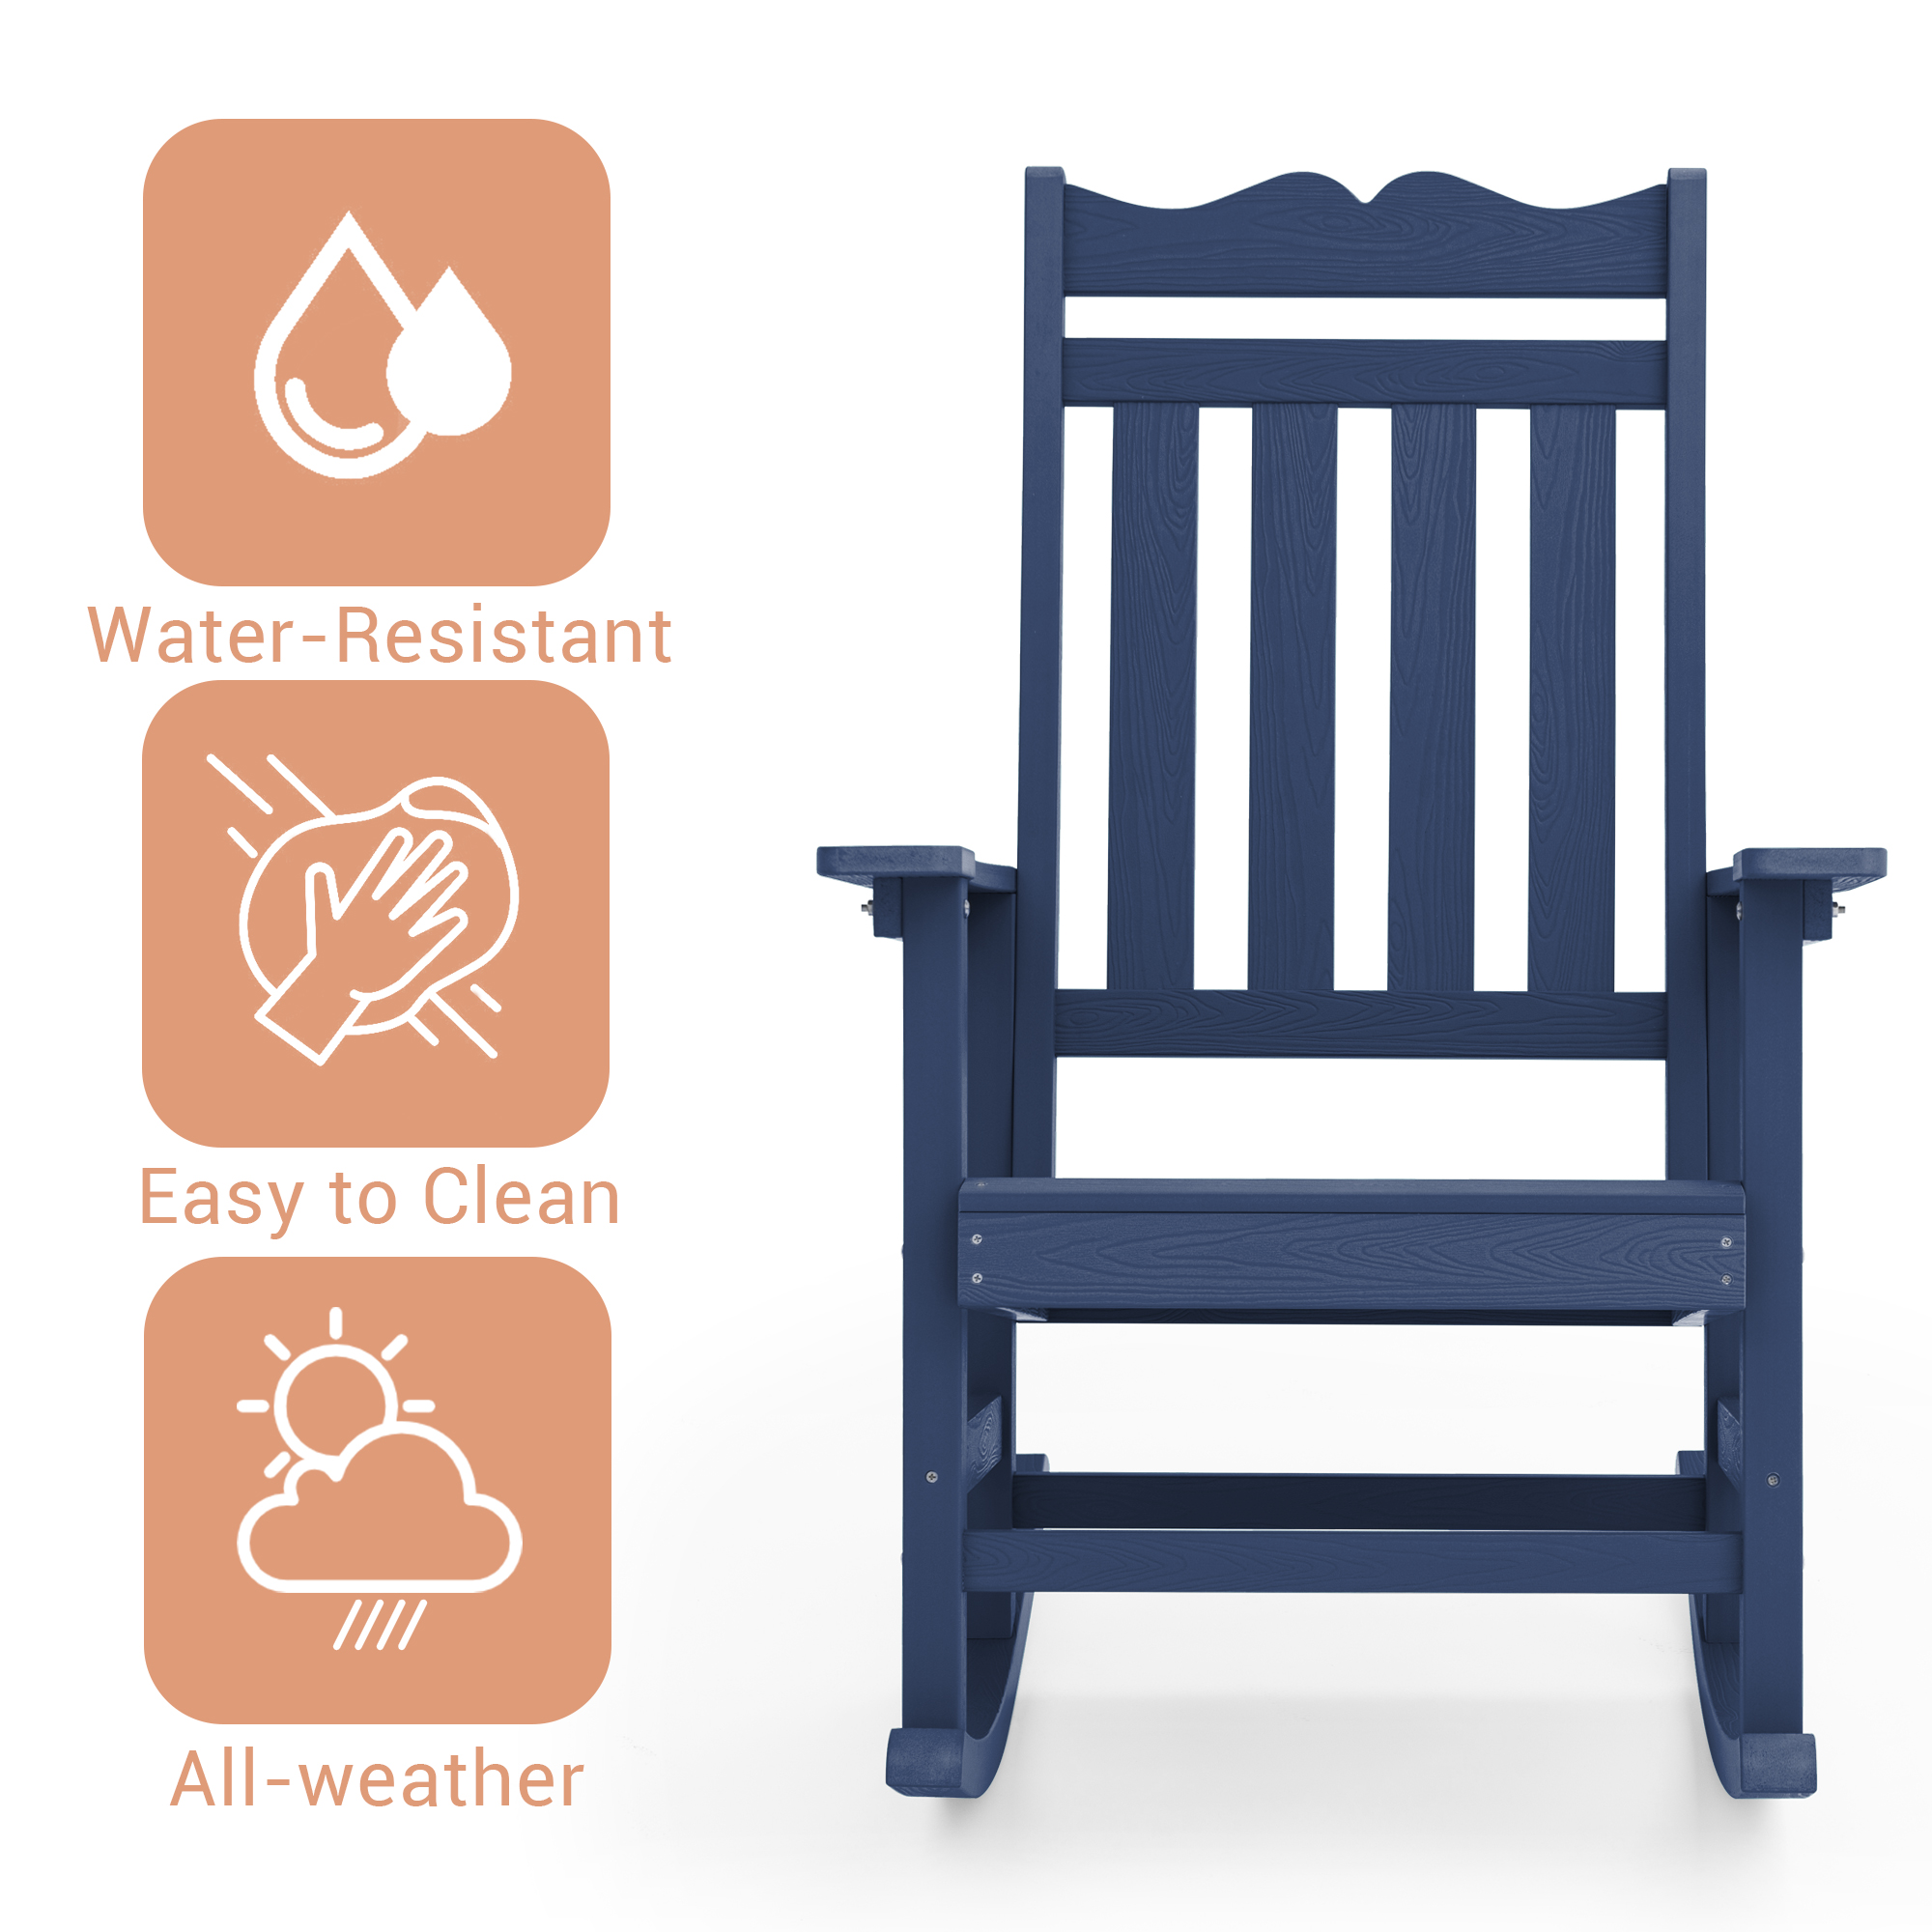 CHYVARY 1 Peaks Patio Adirondack Chair Plastic Single Chairs, Rocking Chair Fire Pit Outdoor Lounge Chair for Lawn and Garden,Navy Blue - image 5 of 8